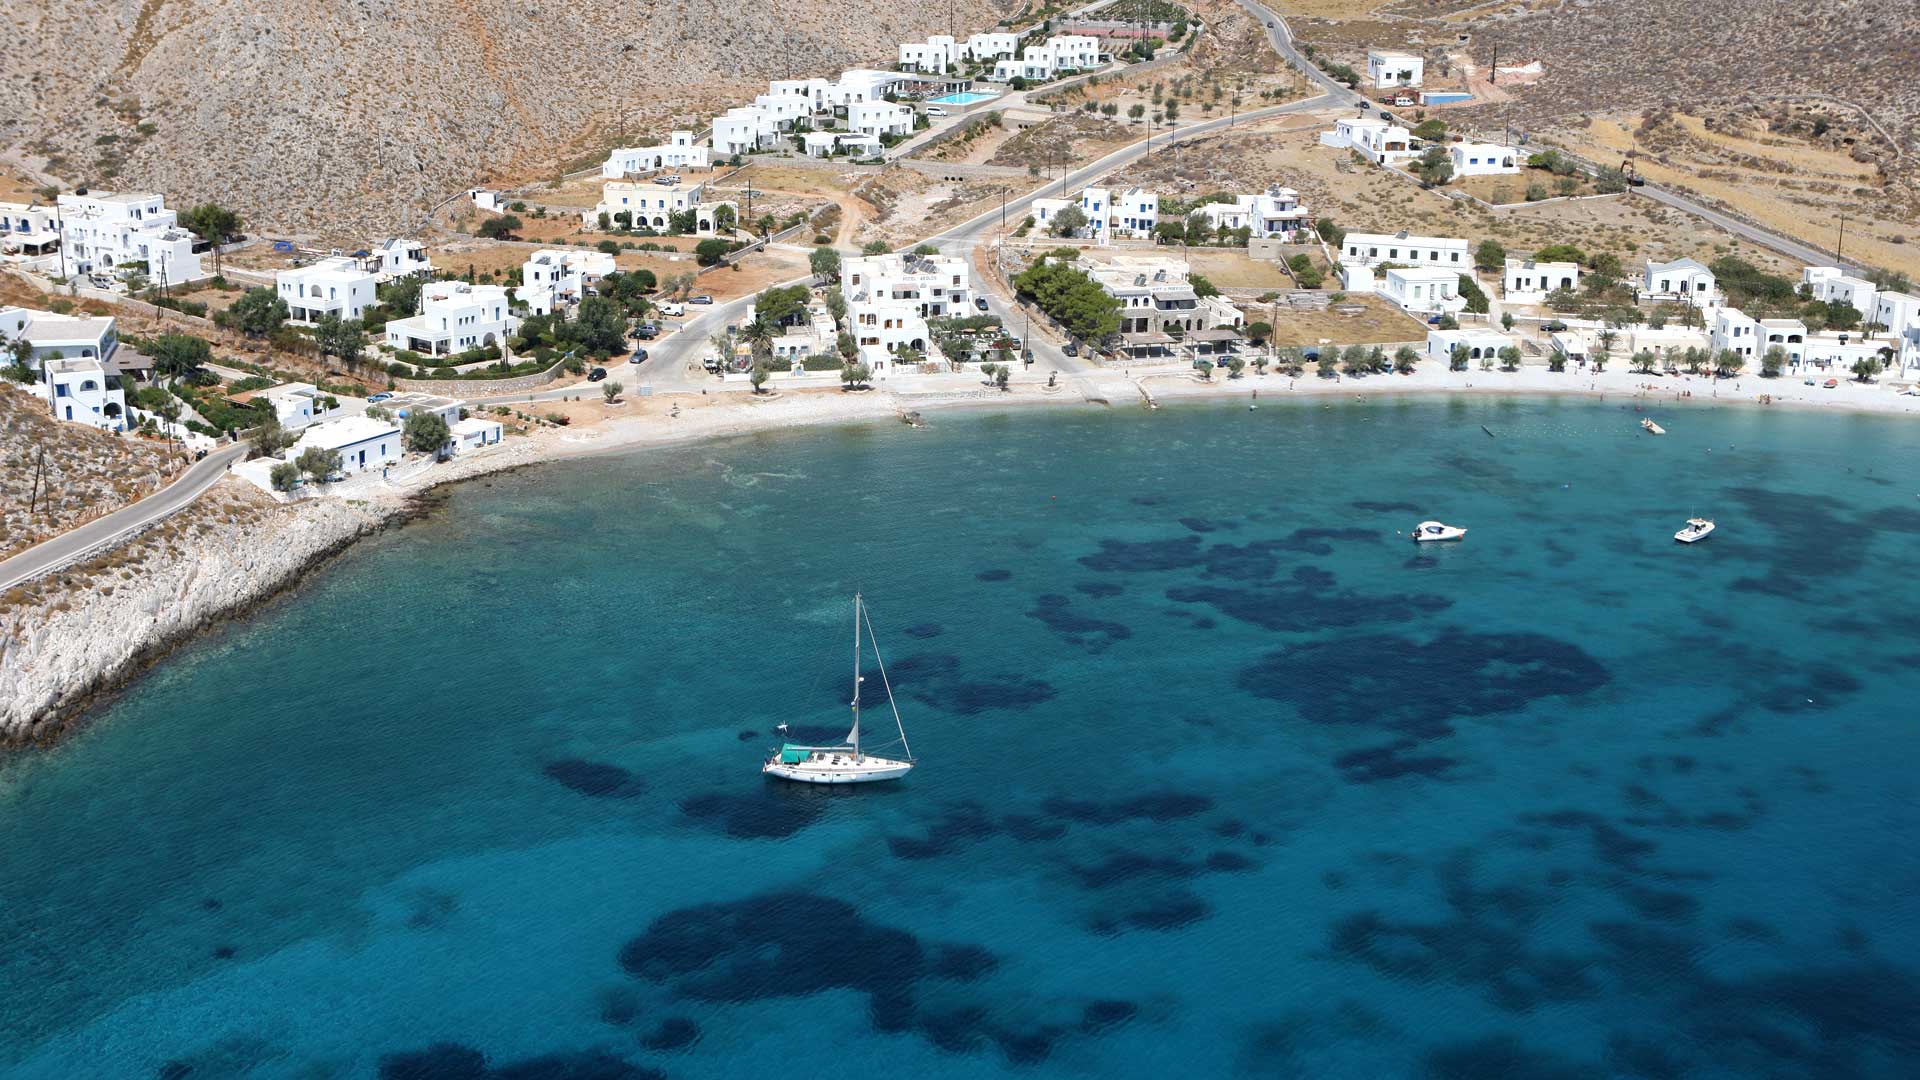 Folegandros island, one of the beautiful Cycladic islands in Greece. Click to view a list of great small hotels and villa rentals. You'll have a fab holiday!